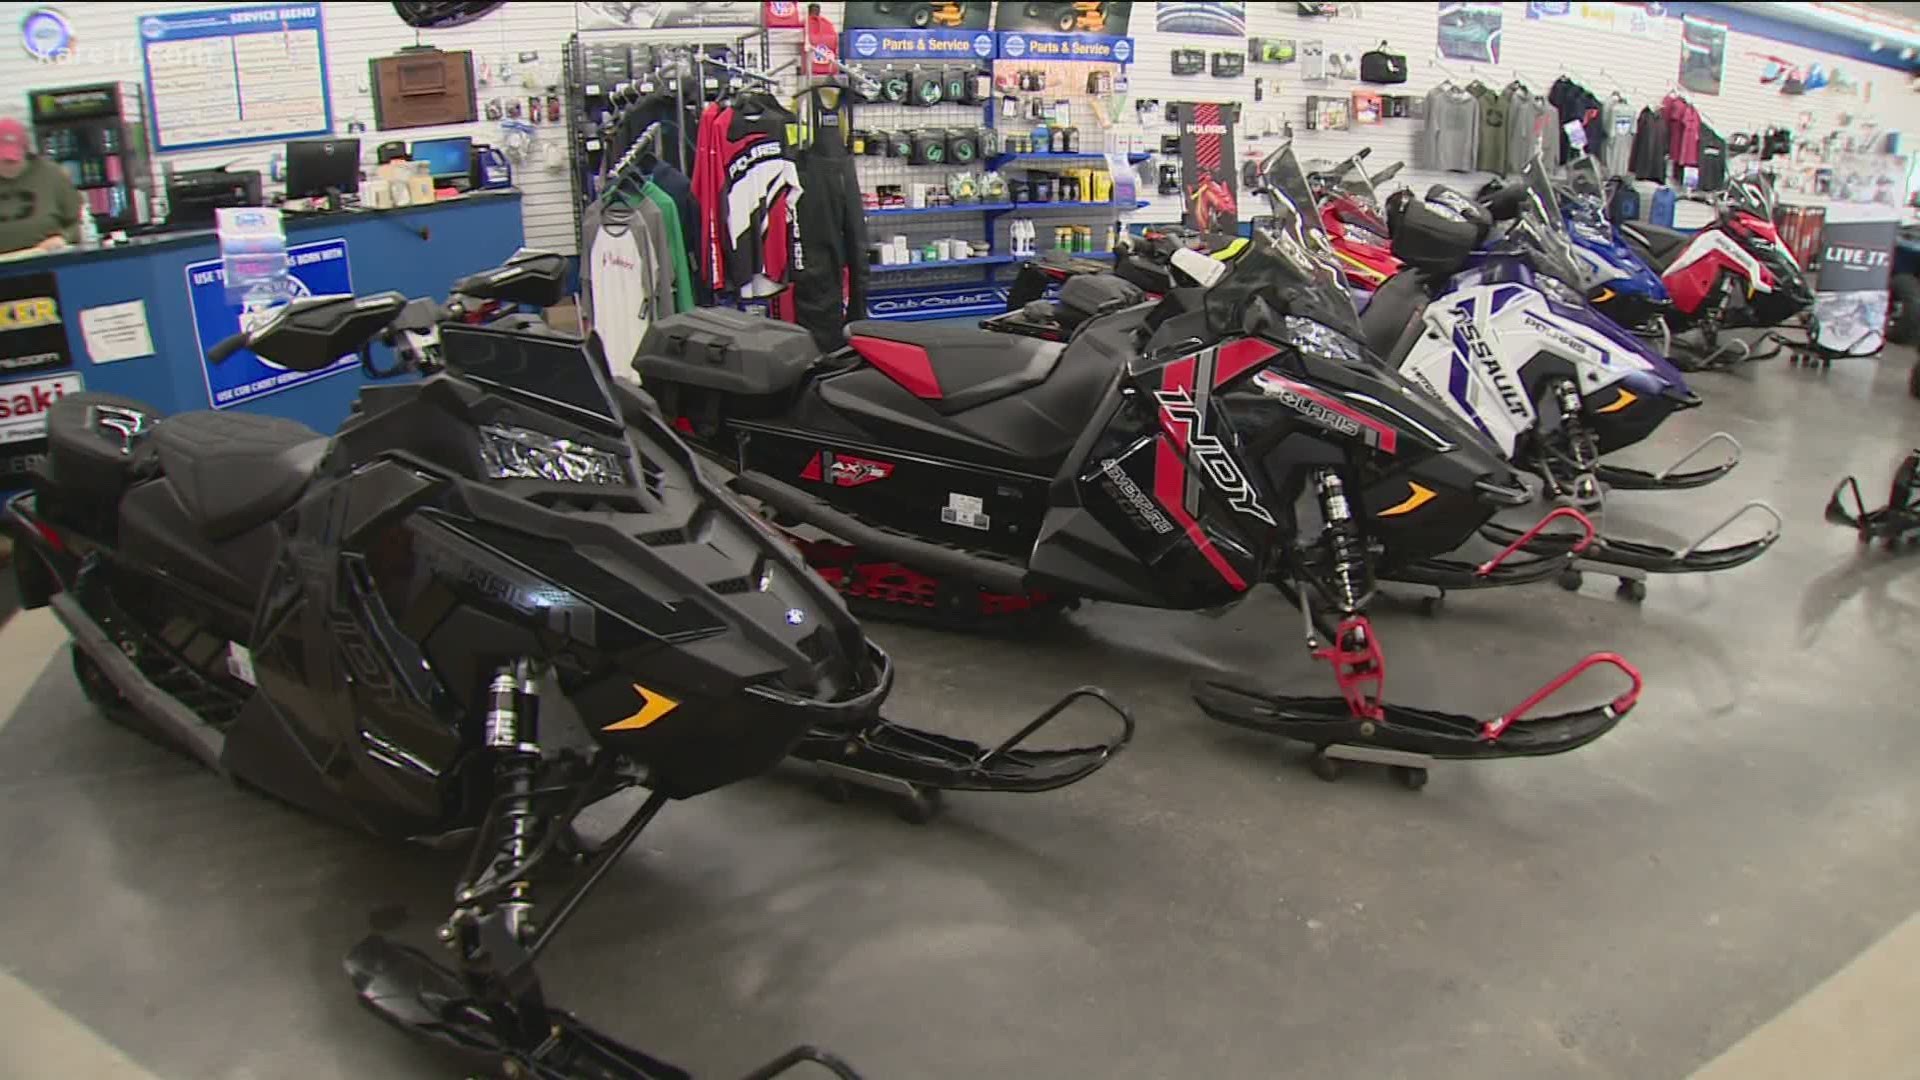 One-third of buyers are new to snowmobiling.